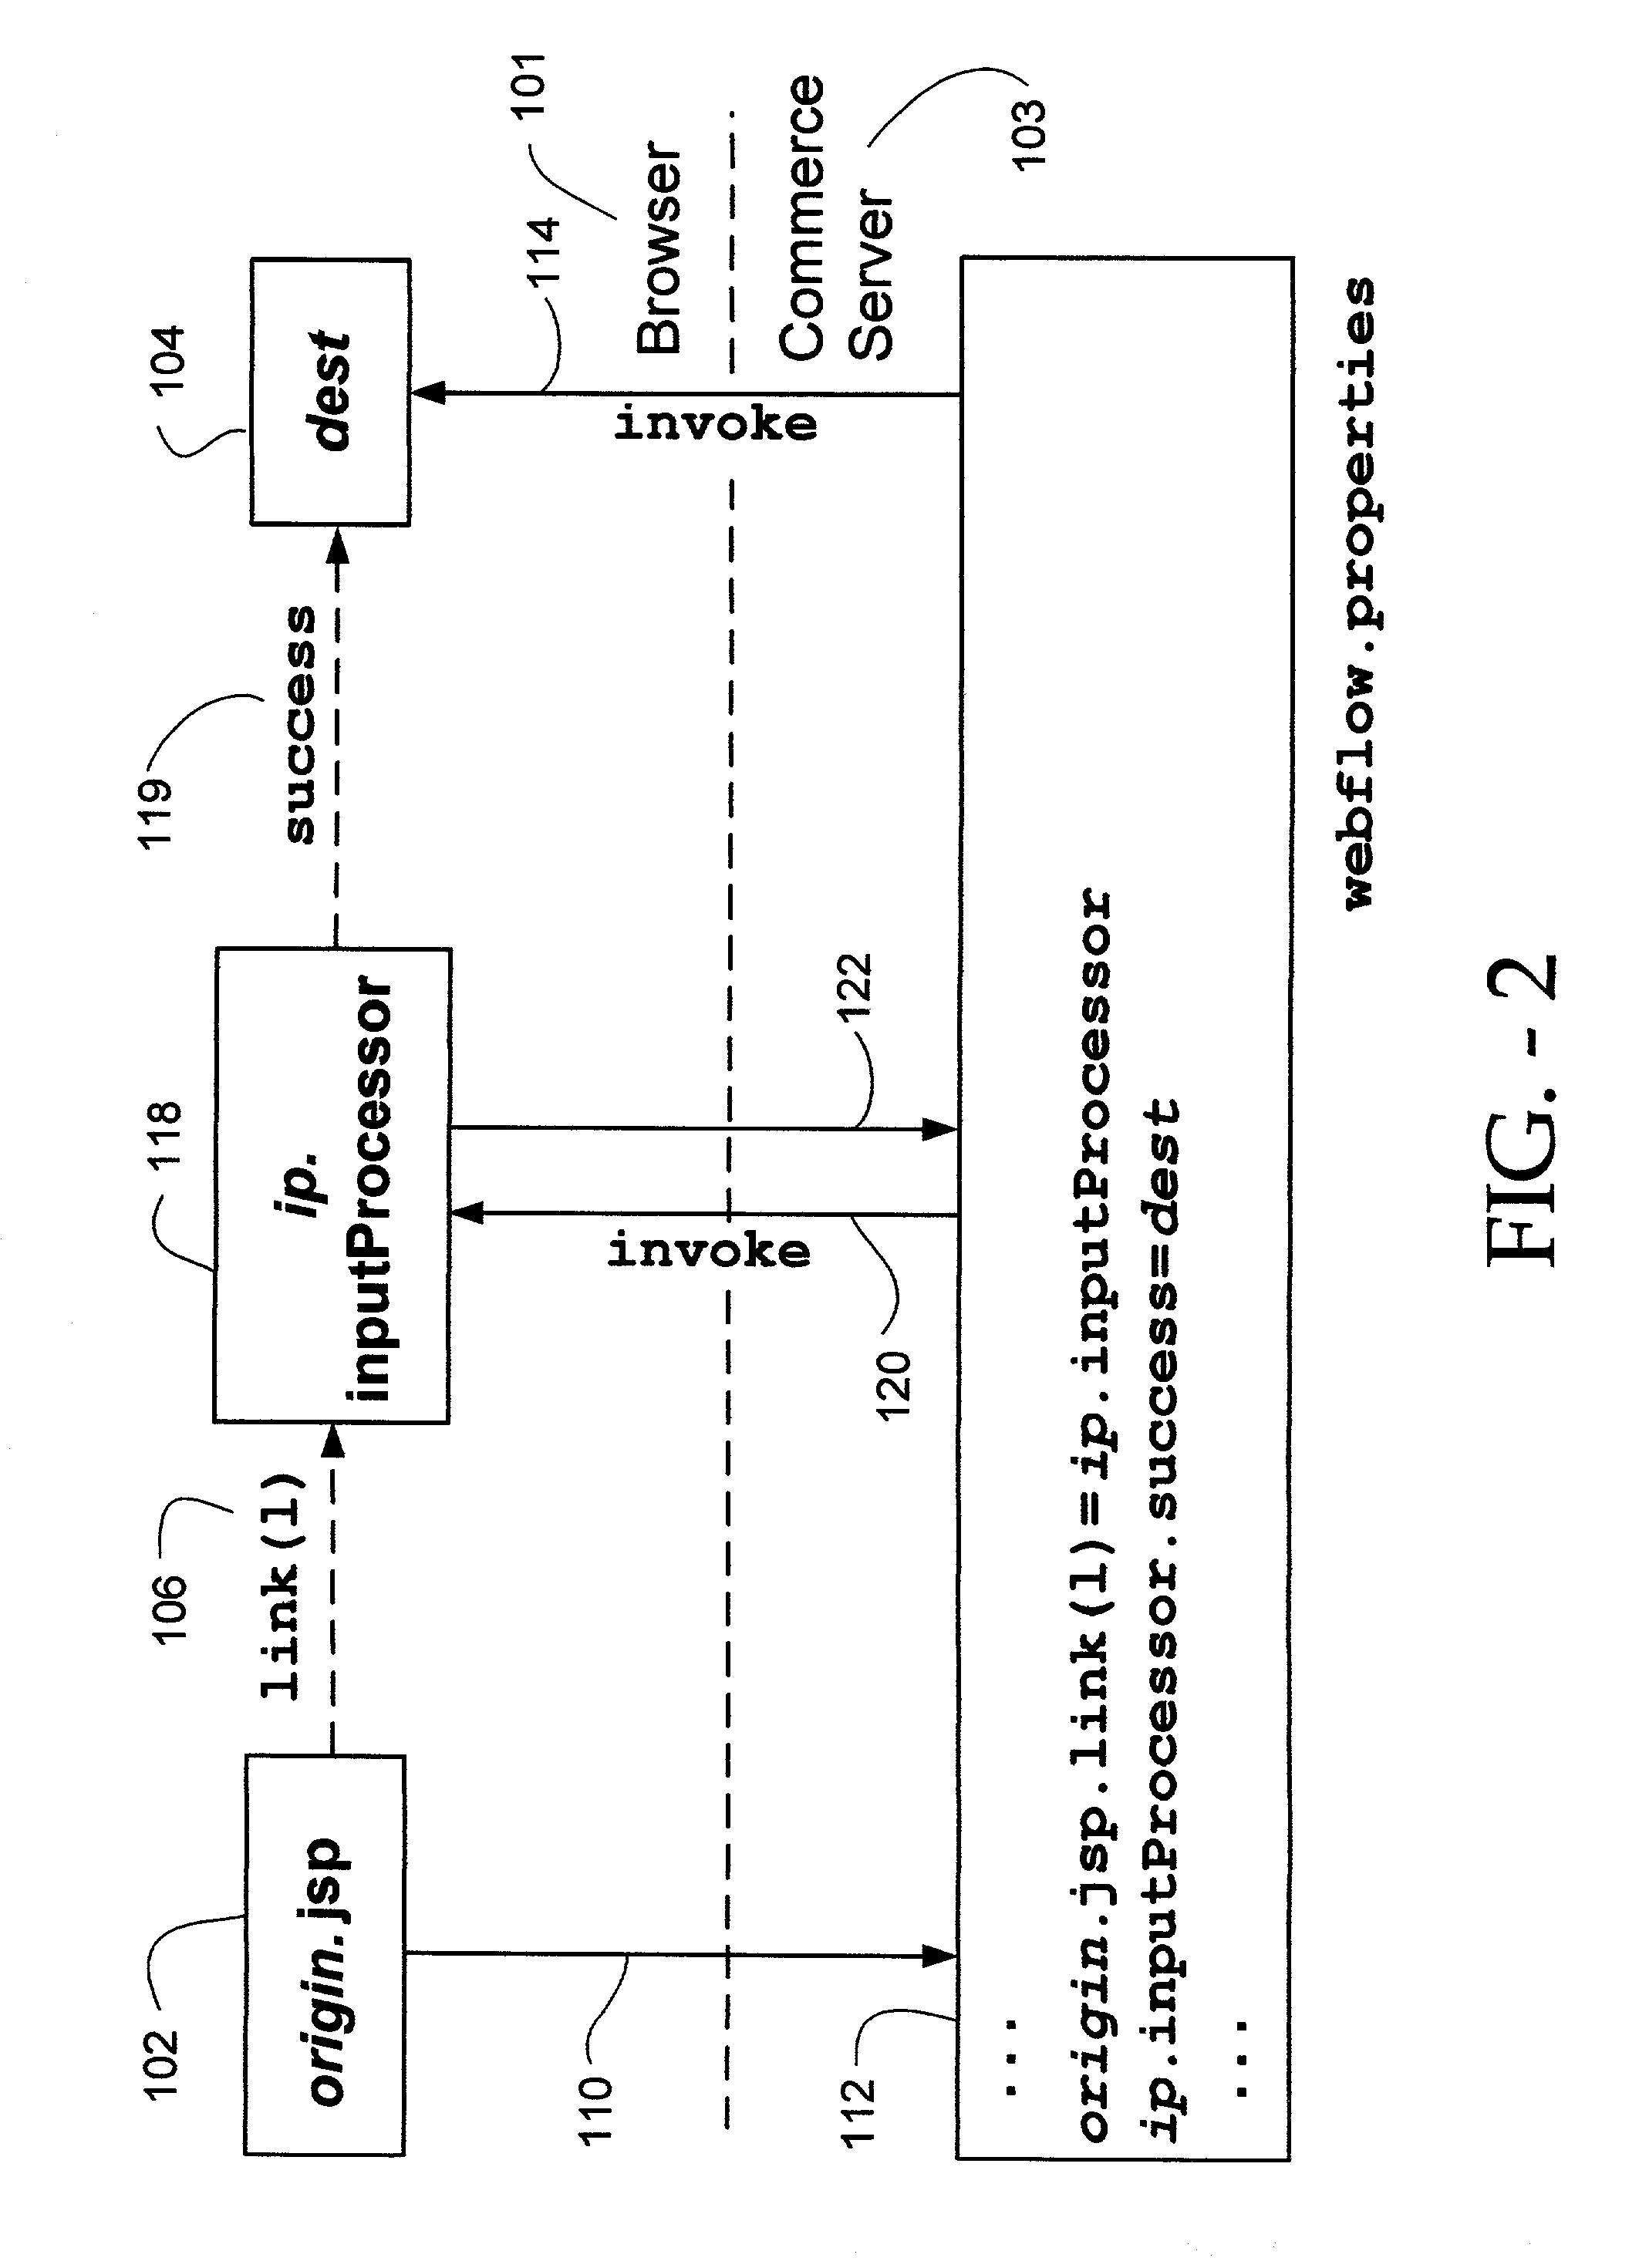 System for managing logical process flow in an online environment